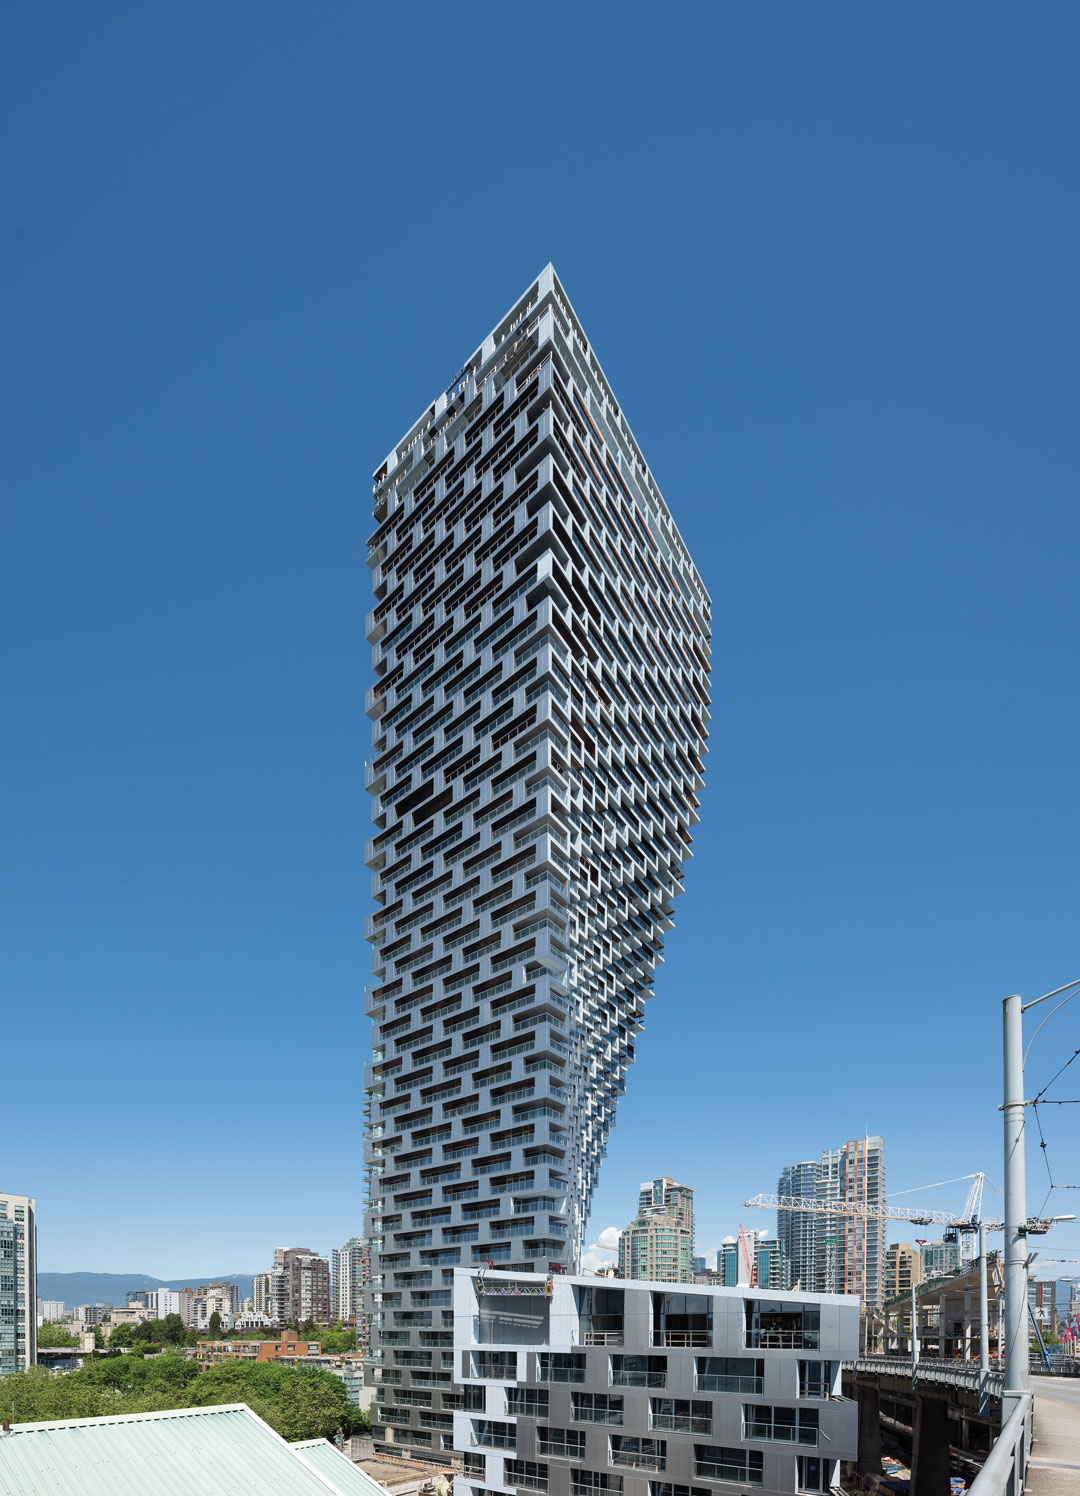 Vancouver House, As Featured In Our Newly Updated Wallpaper* - Tower Block - HD Wallpaper 